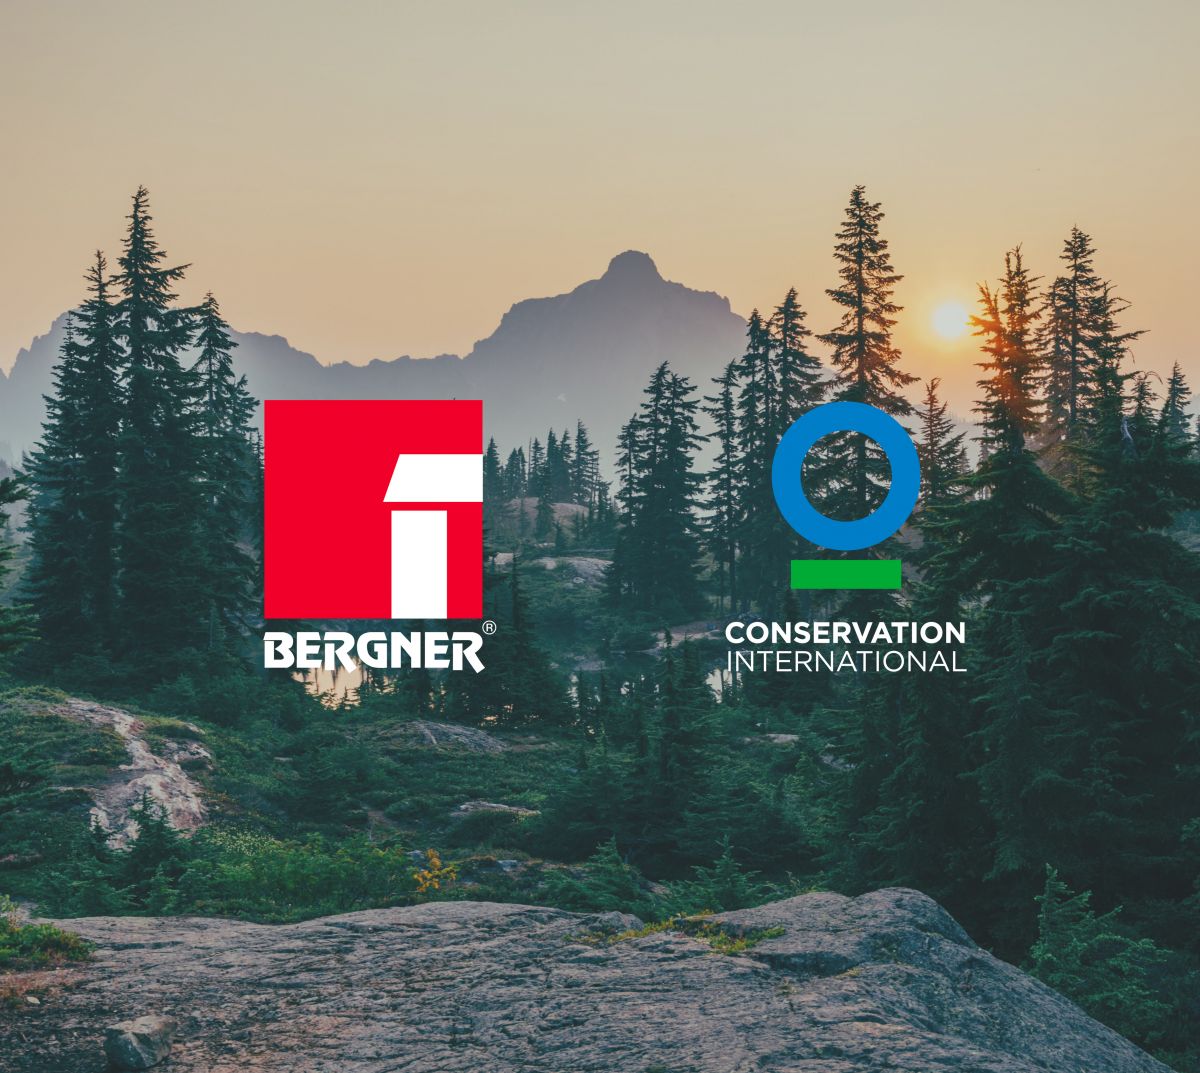 Bergner signed a Collaboration Agreement with "Conservation International"